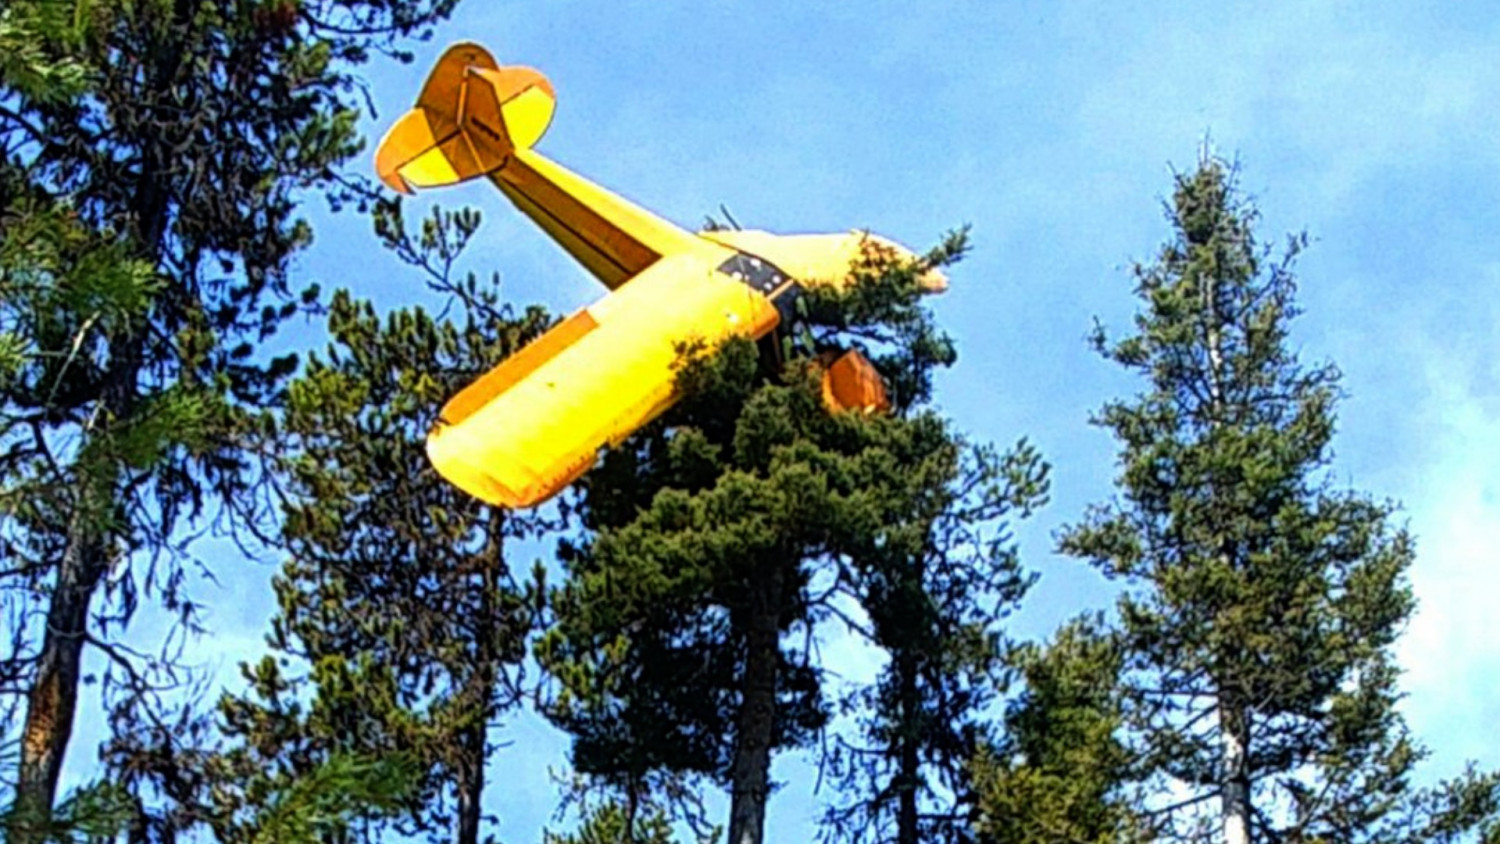 Pilot Rescued From Plane That Crash-Landed Atop Idaho Tree